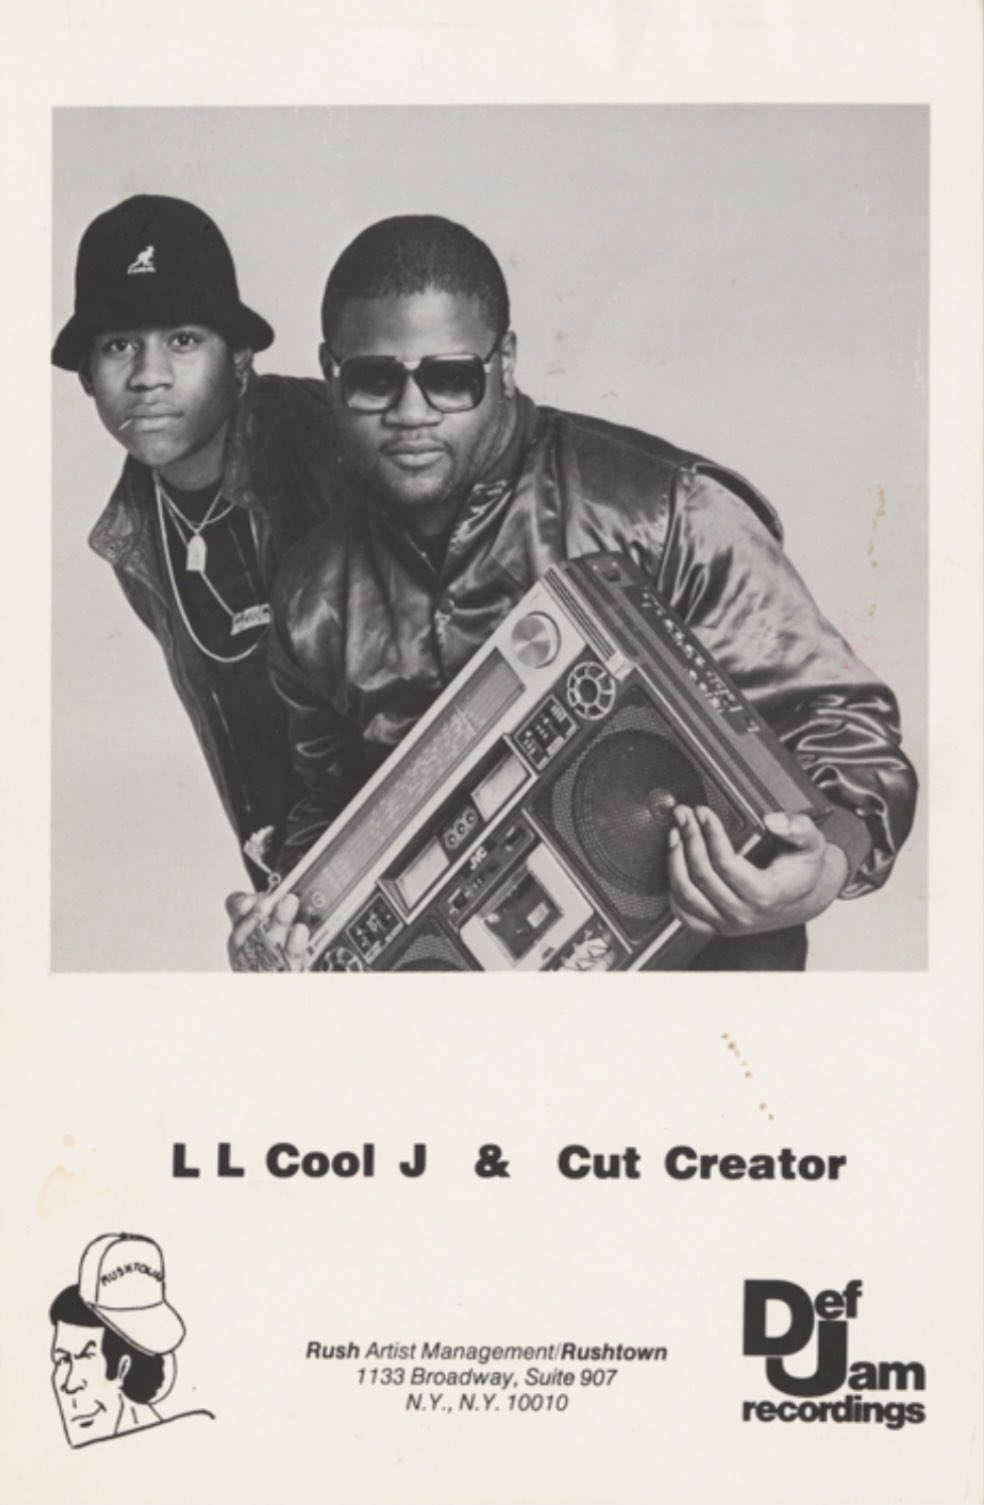 Classic Albums: 'Radio' by LL COOL J